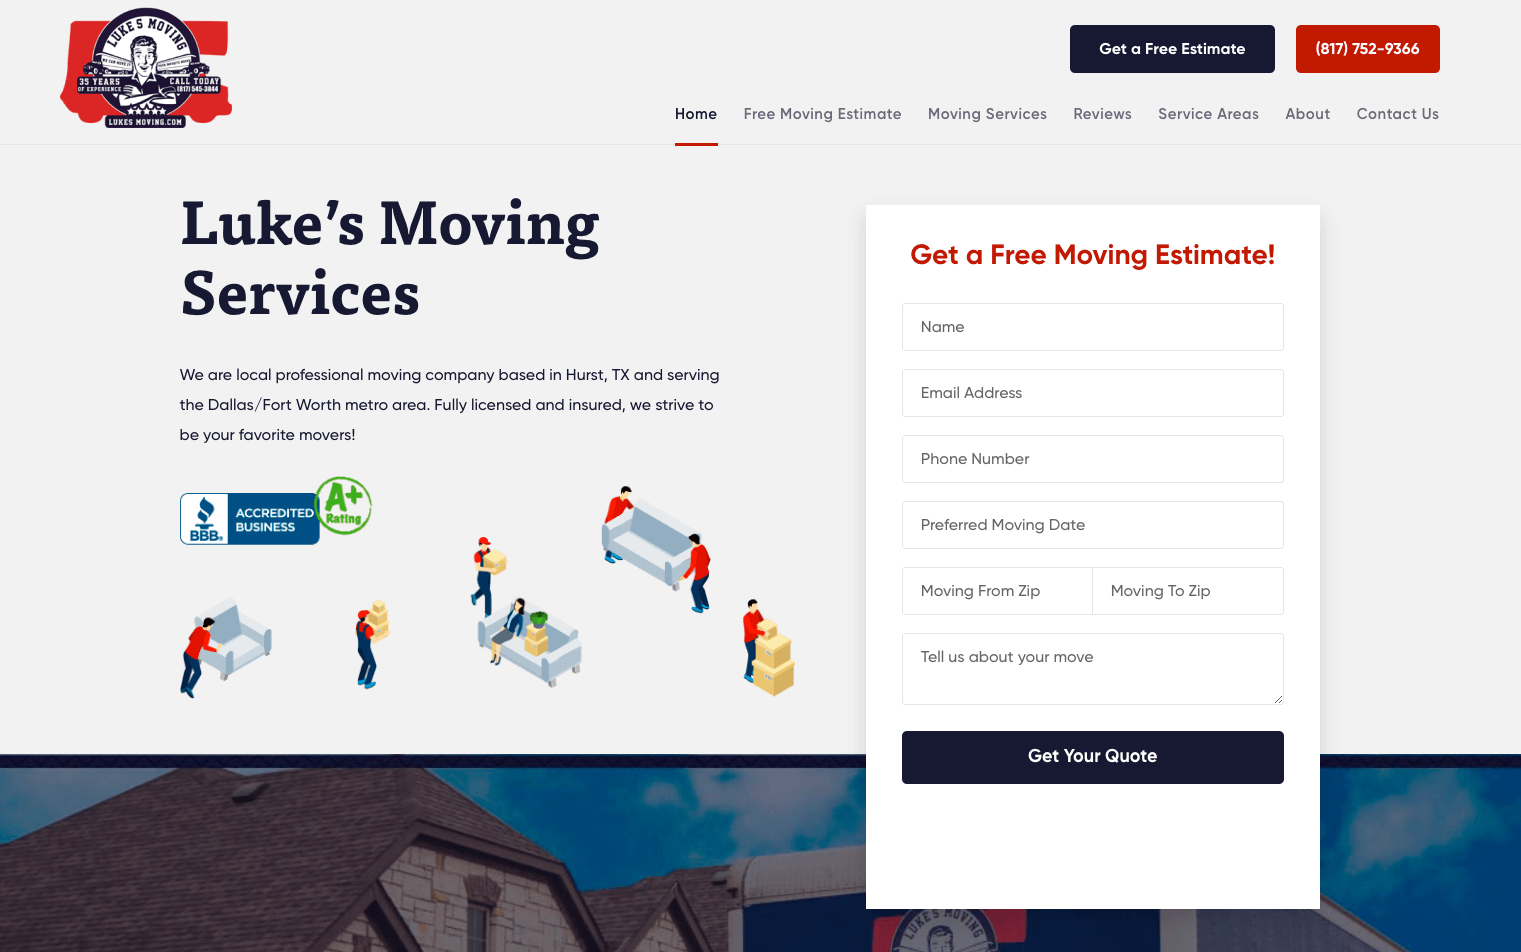 Image of Moving Company Website Home Page